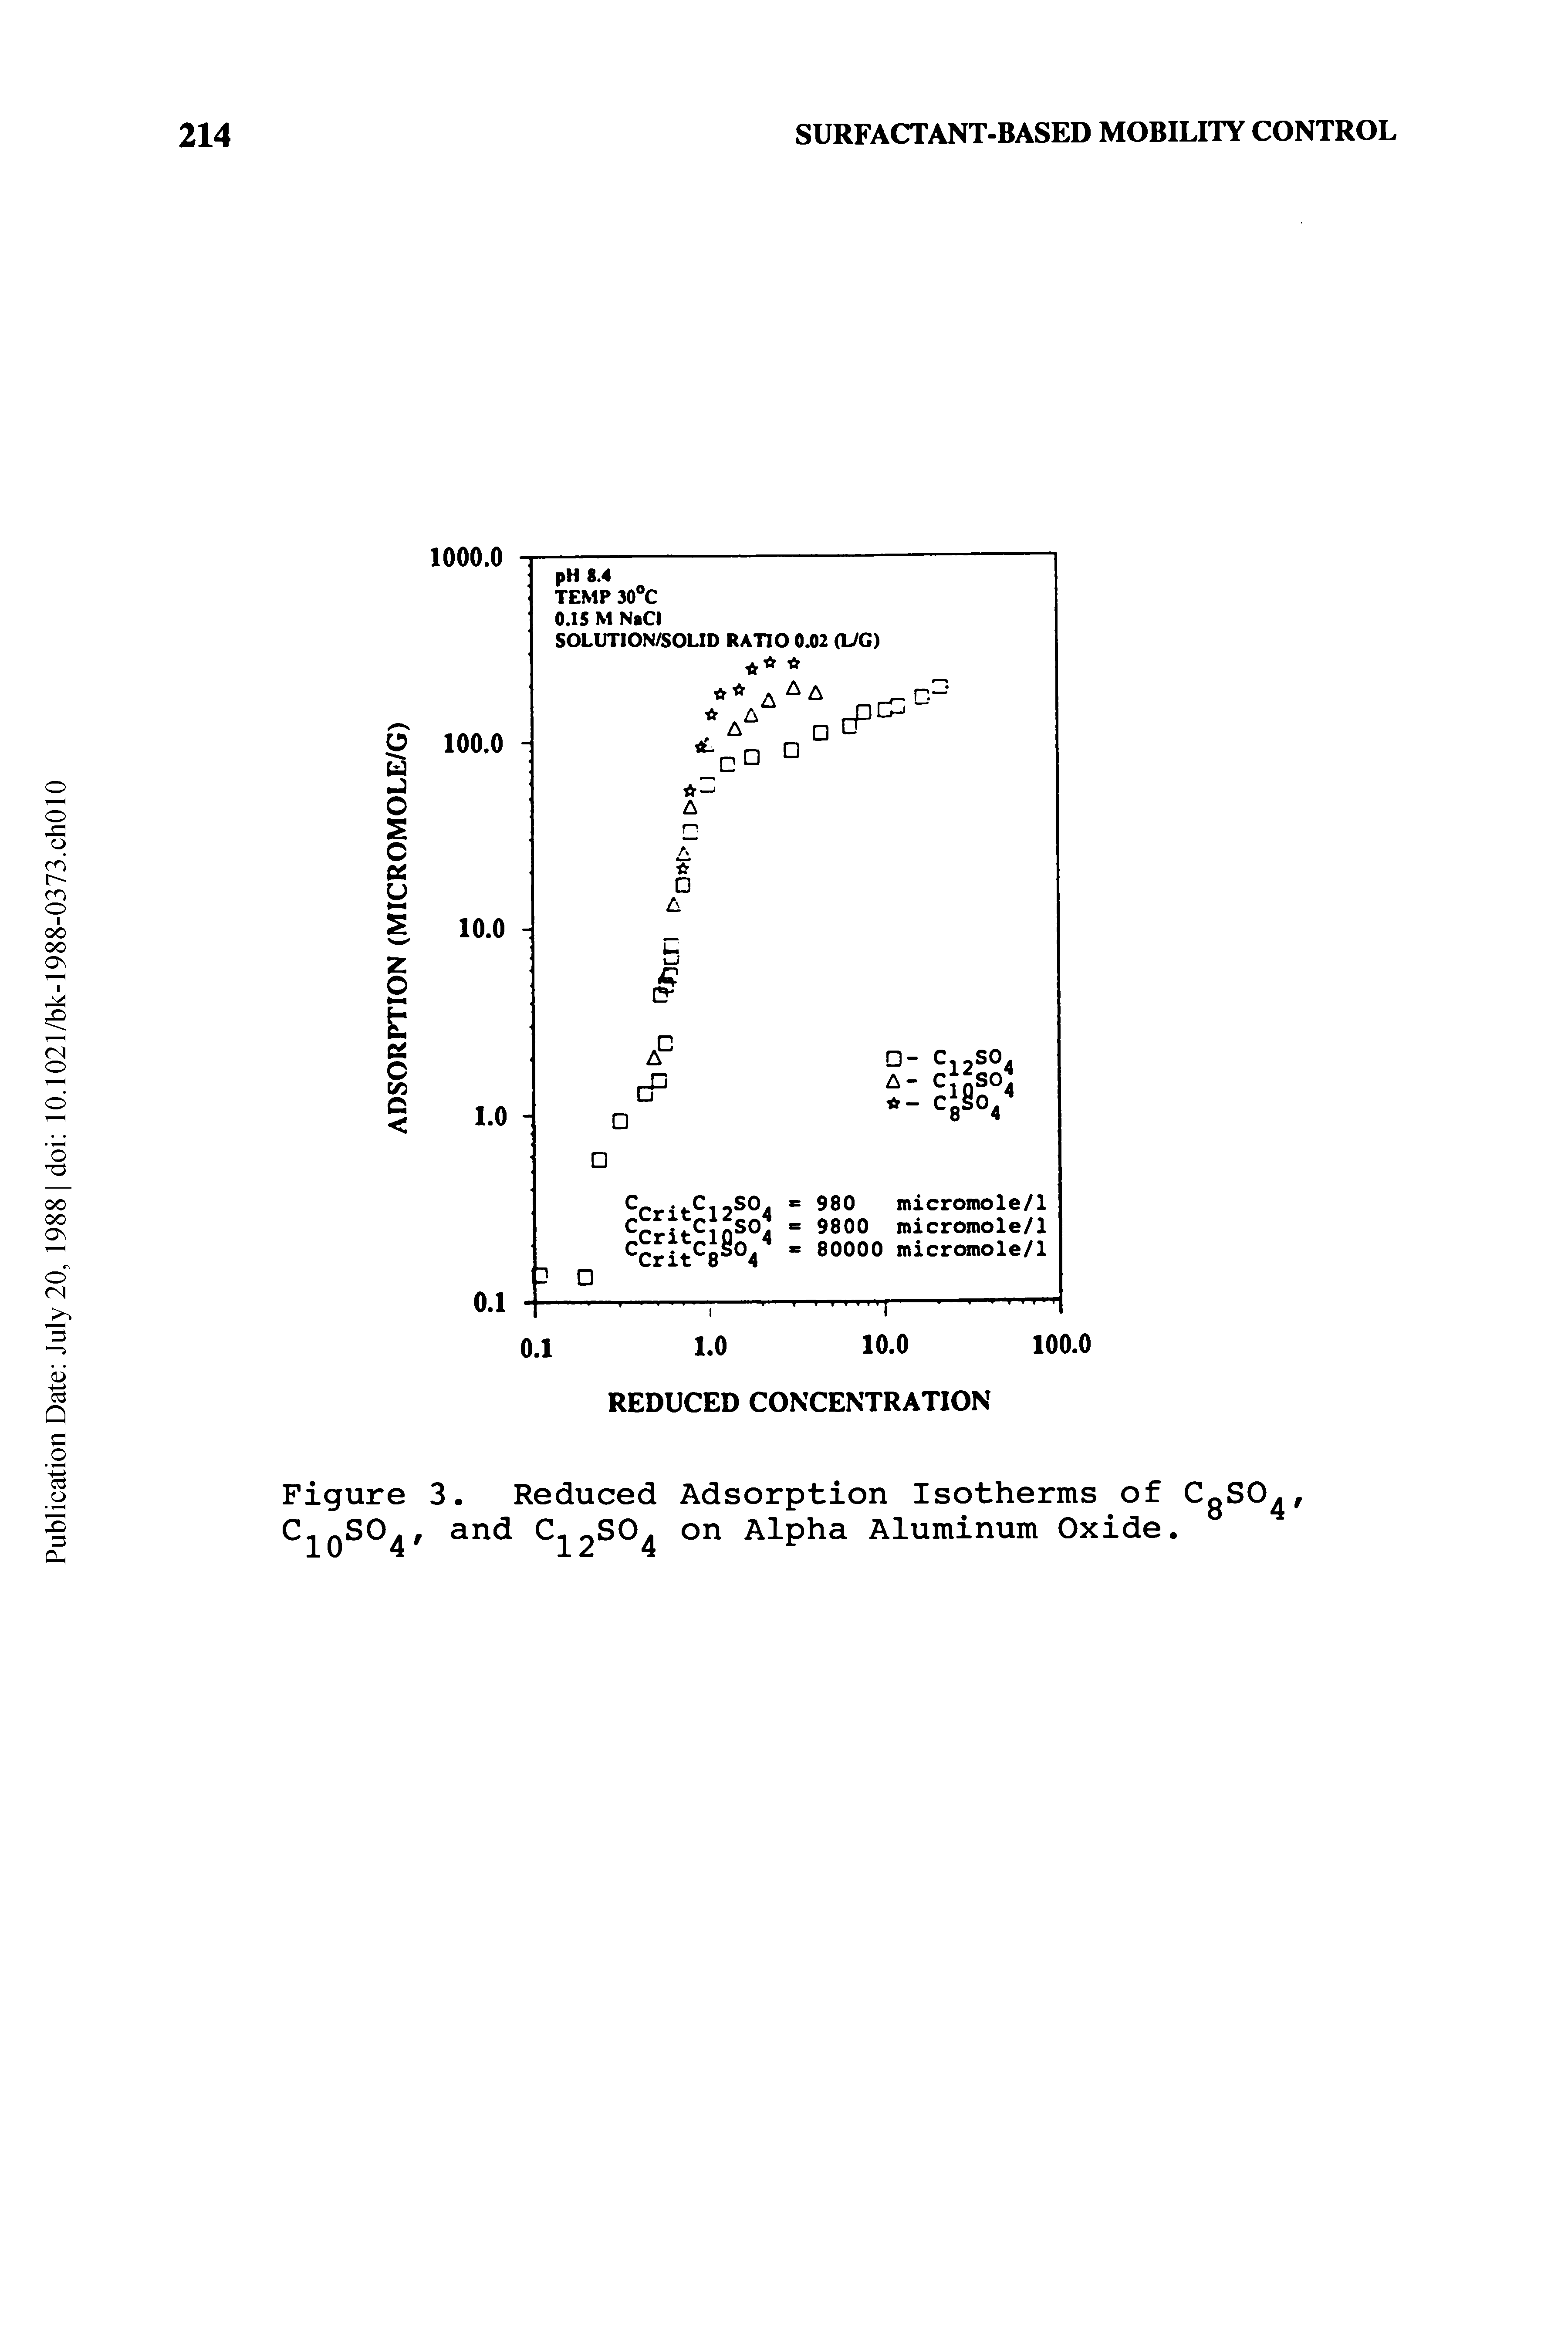 Figure 3. Reduced Adsorption Isotherms of CgSO, and 2 04 on Alpha Aluminum Oxide.